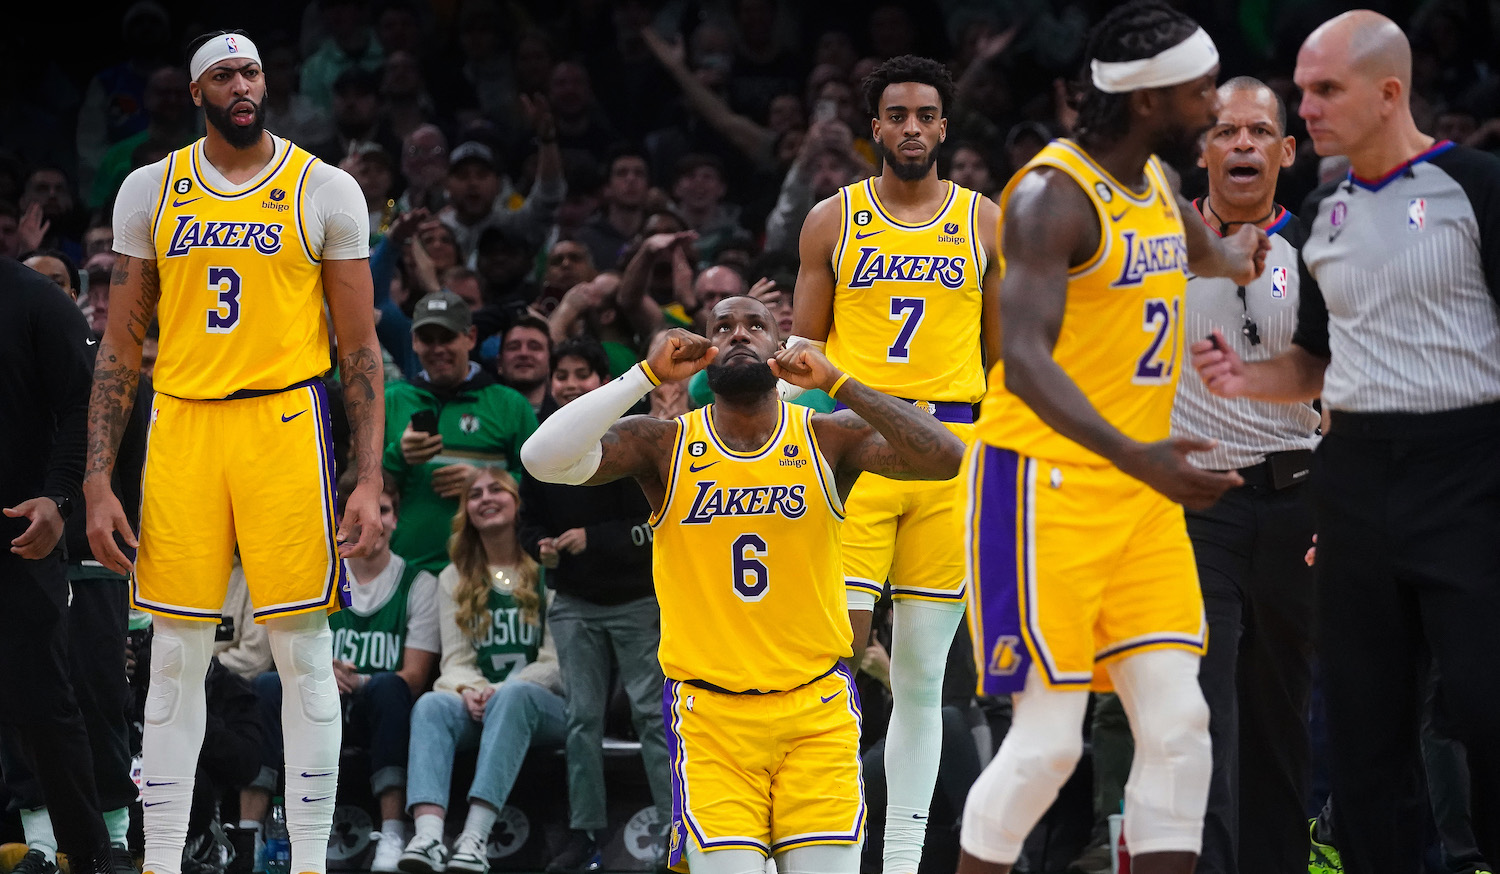 Boston, MA - January 28: Los Angeles Lakers SF LeBron James falls to his knees in frustration after the final play of regulation. The Lakers lost to the Boston Celtics, 125-121, in overtime. (Photo by Barry Chin/The Boston Globe via Getty Images)